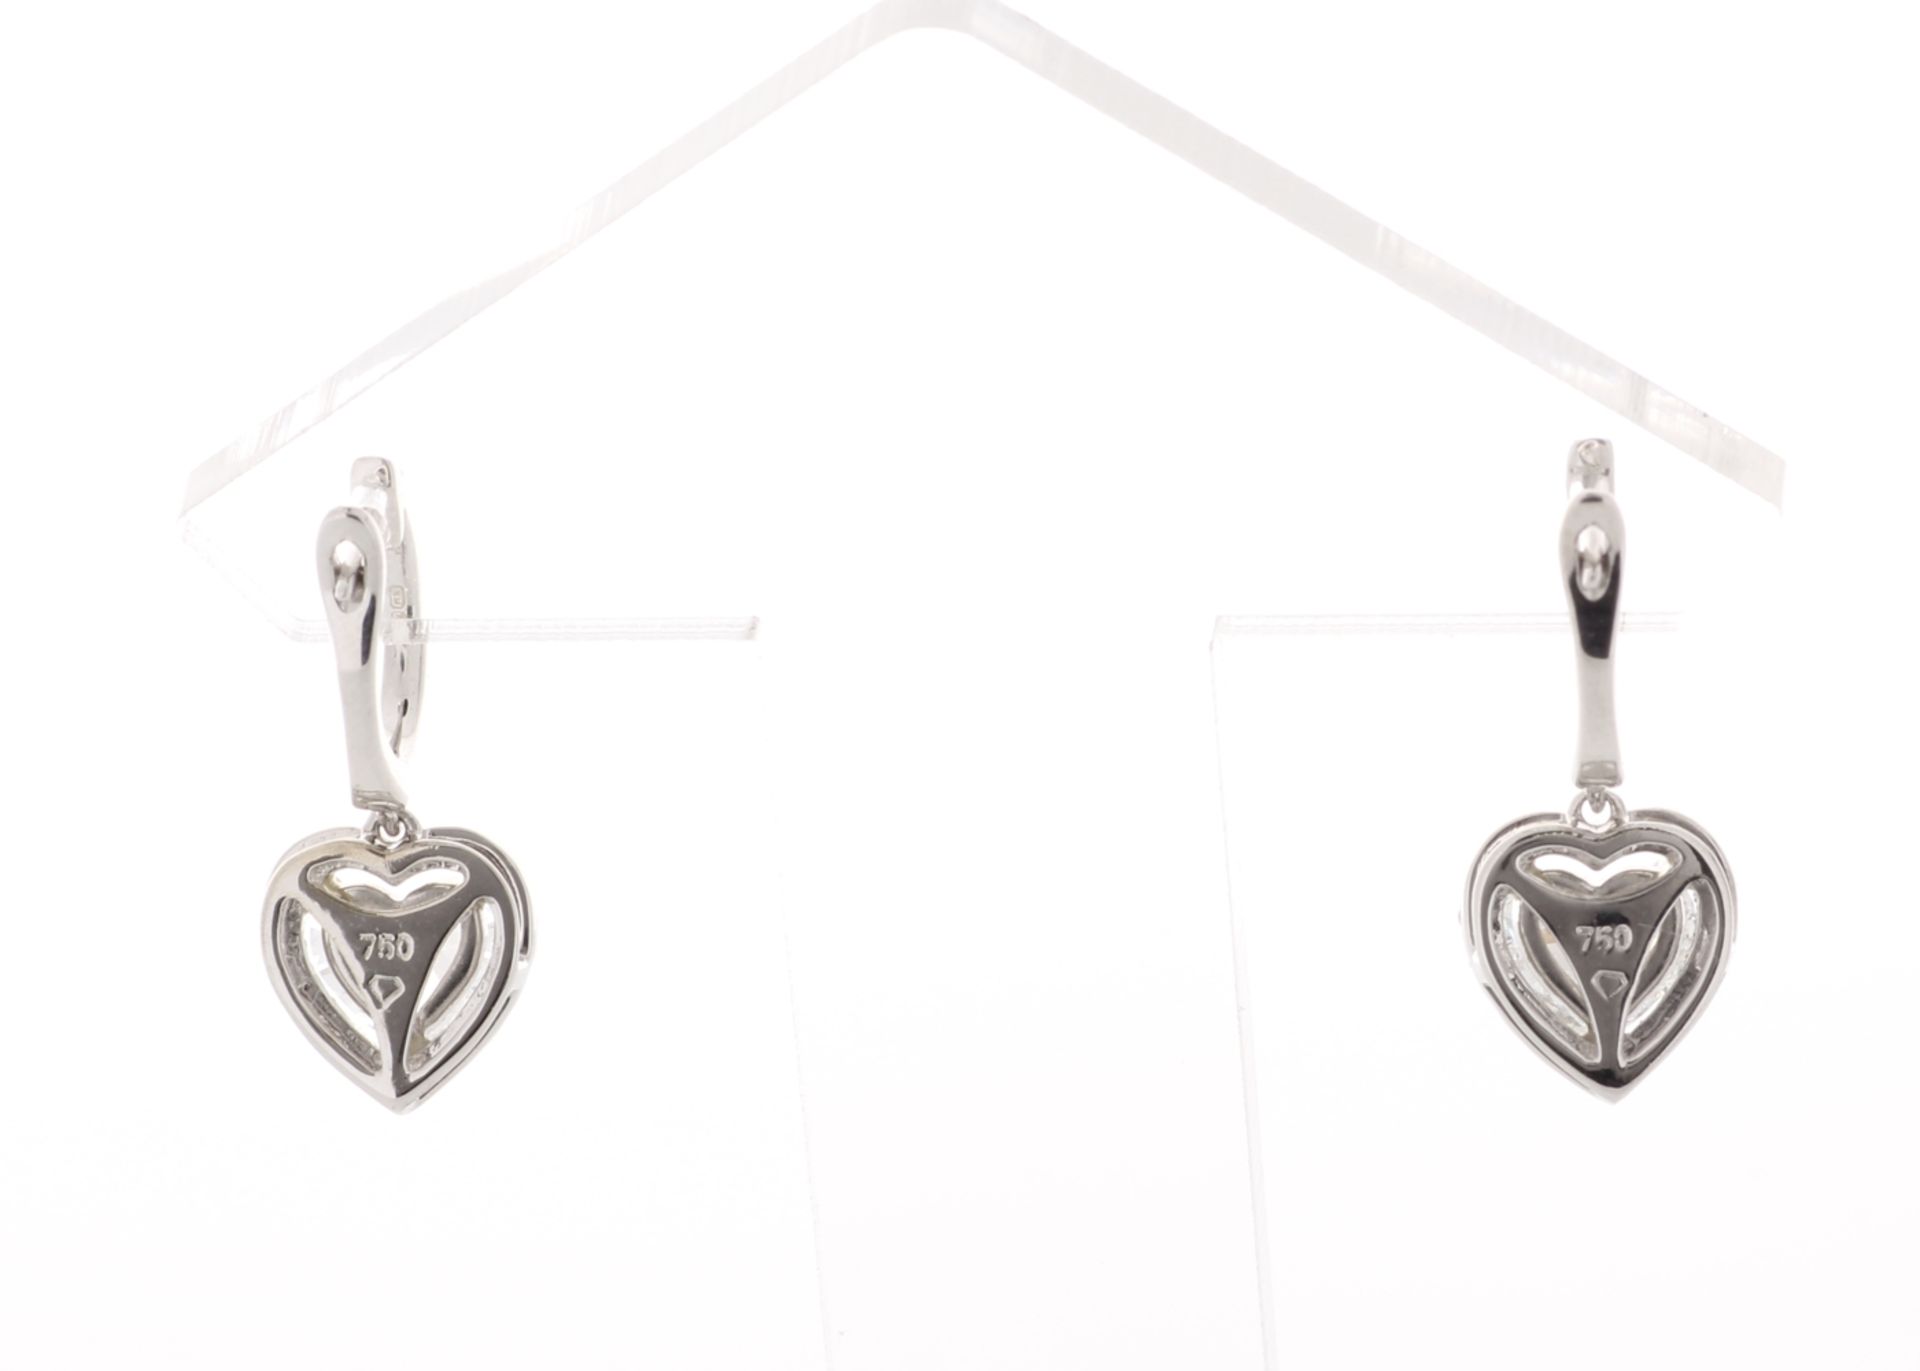 18ct White Gold Heart Shape Halo Drop Earring (1.34) 1.74 Carats - Valued by GIE £37,395.00 - Two - Image 4 of 5